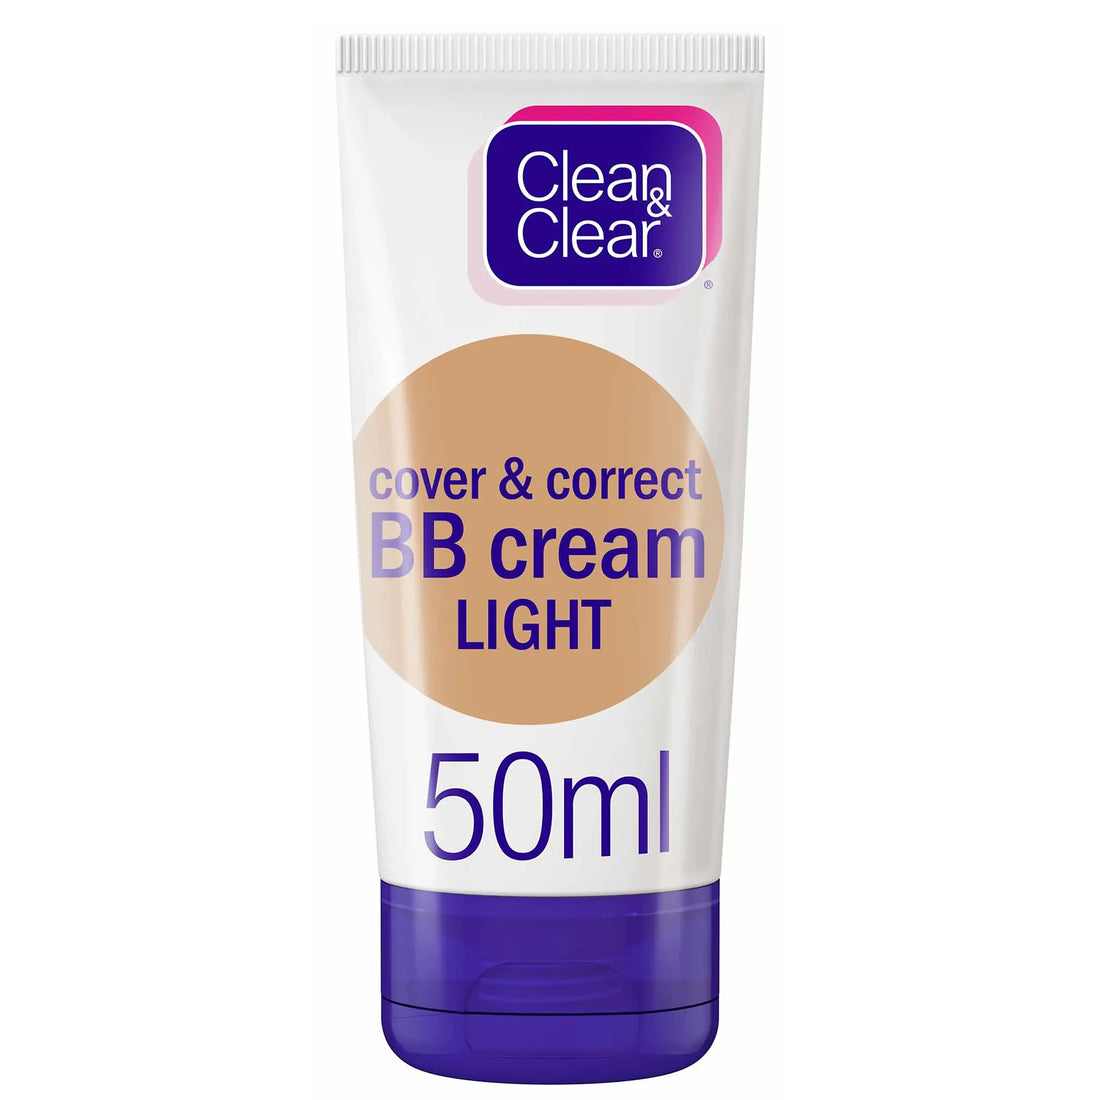 CLEAN &amp; CLEAR BB Cream, Cover &amp; Correct, Light, 50ml